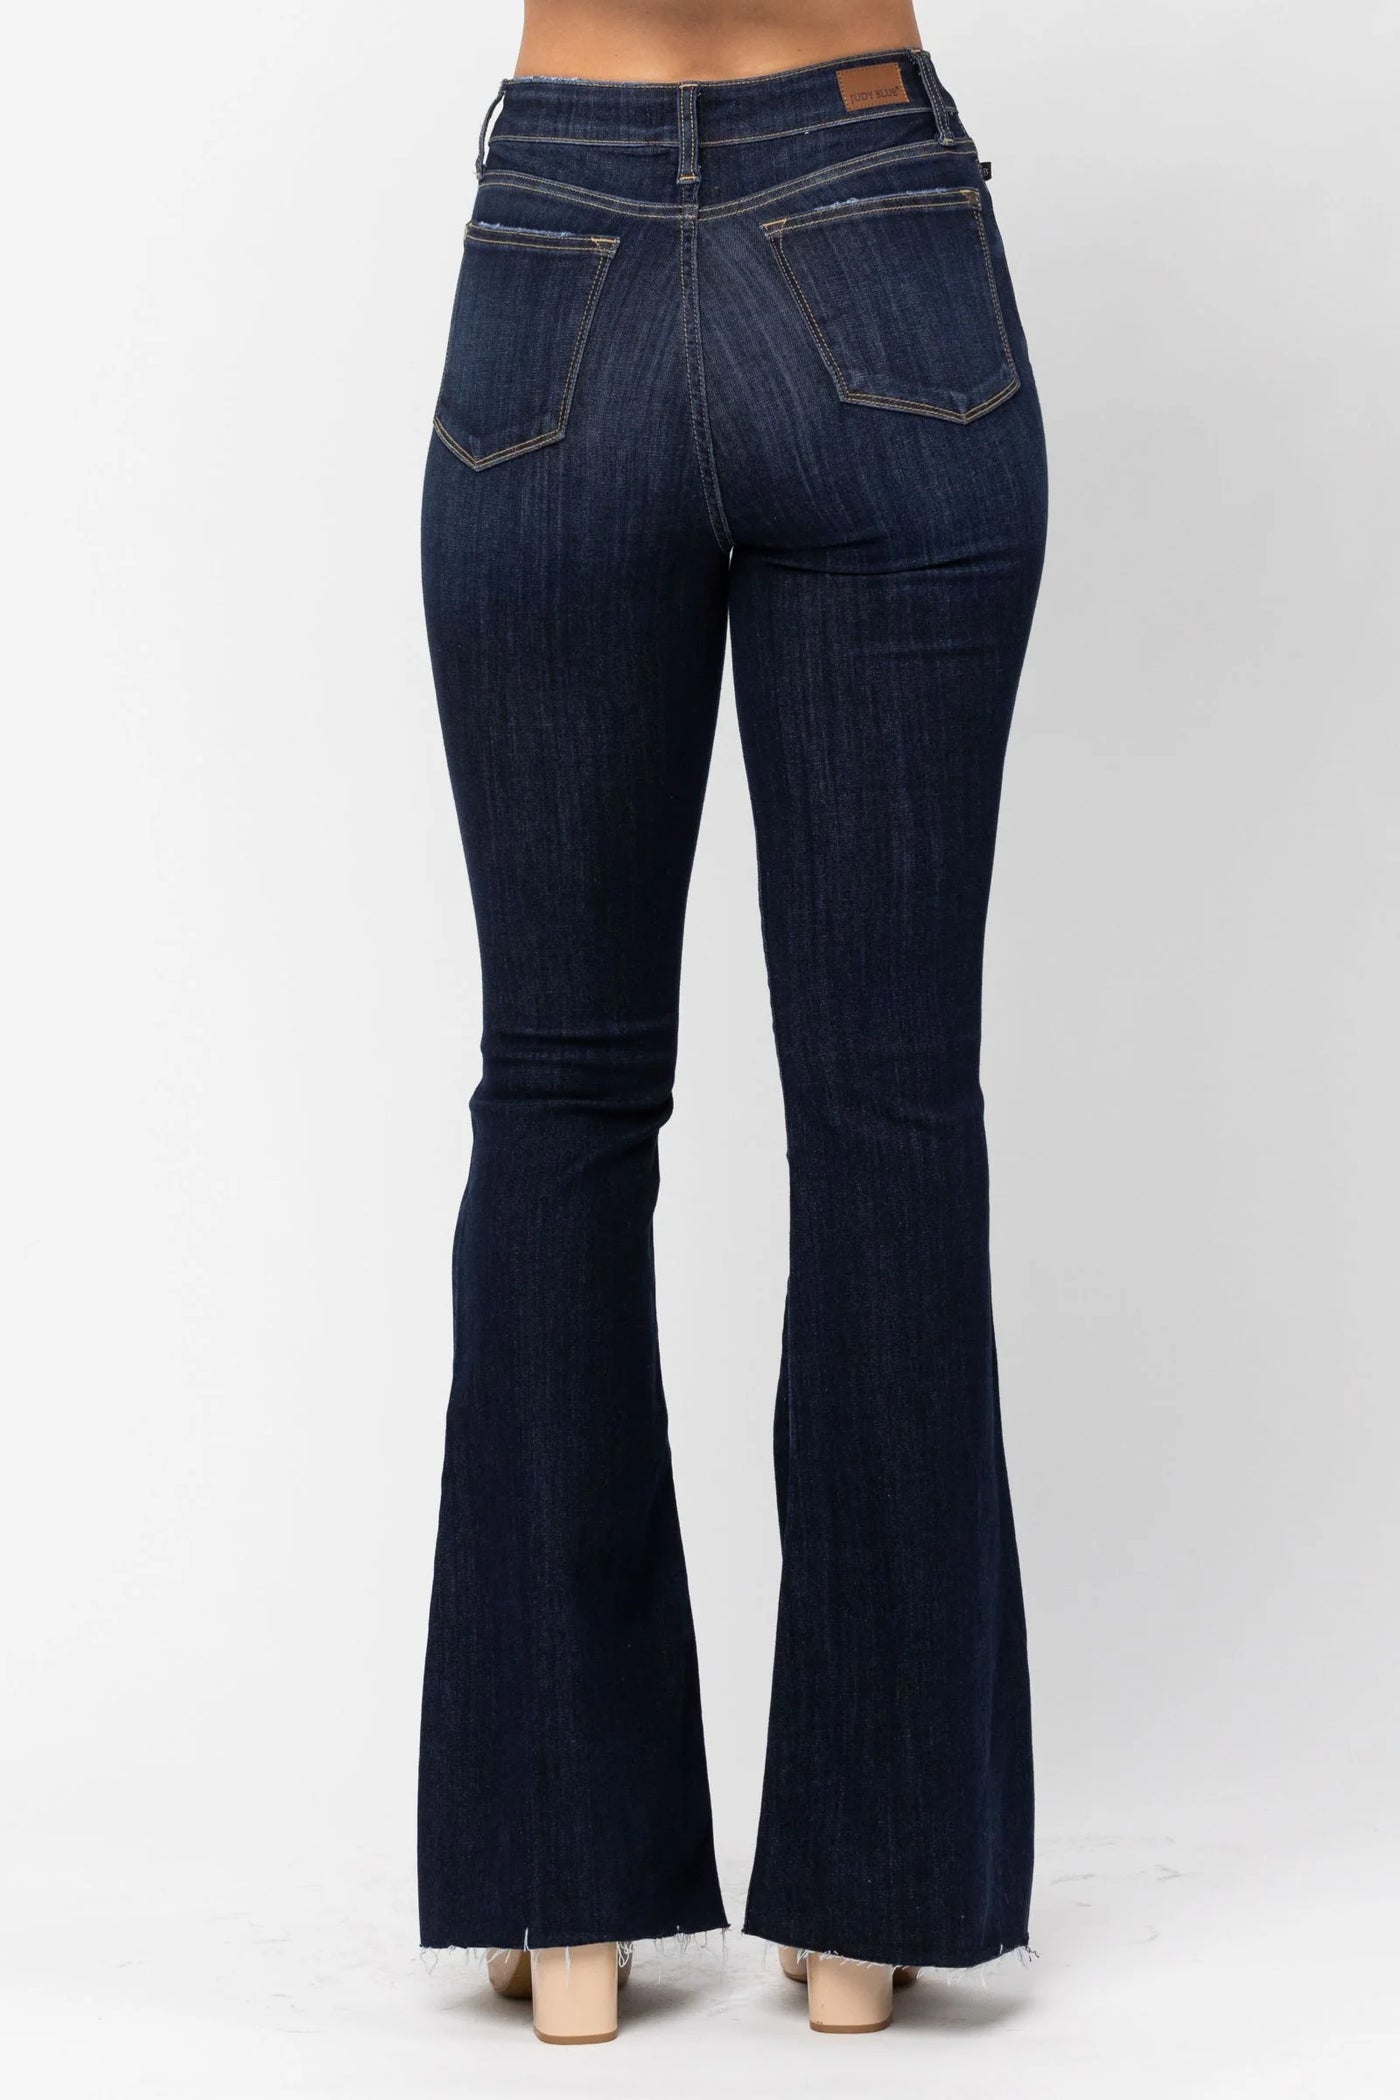 Judy Blue Curie Classic Flare Jeans